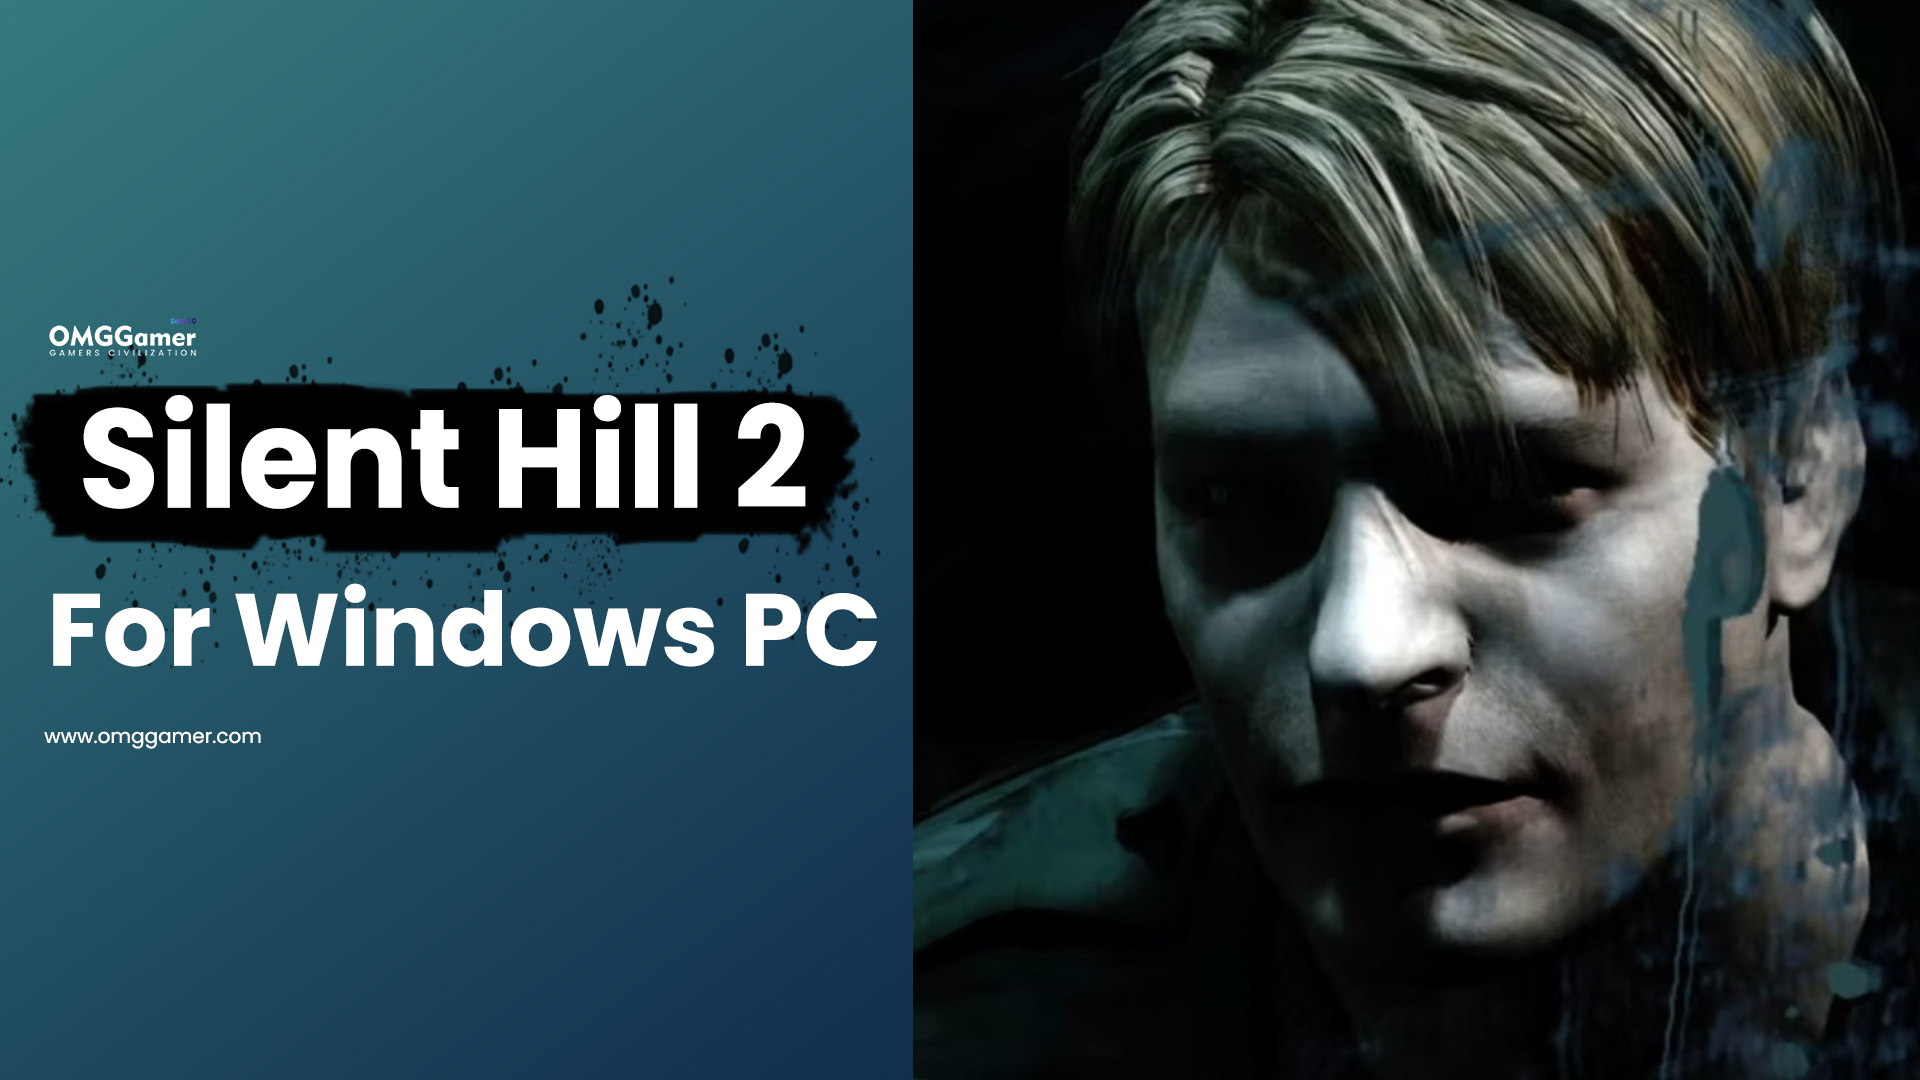 Silent Hill 2 for Windows PC